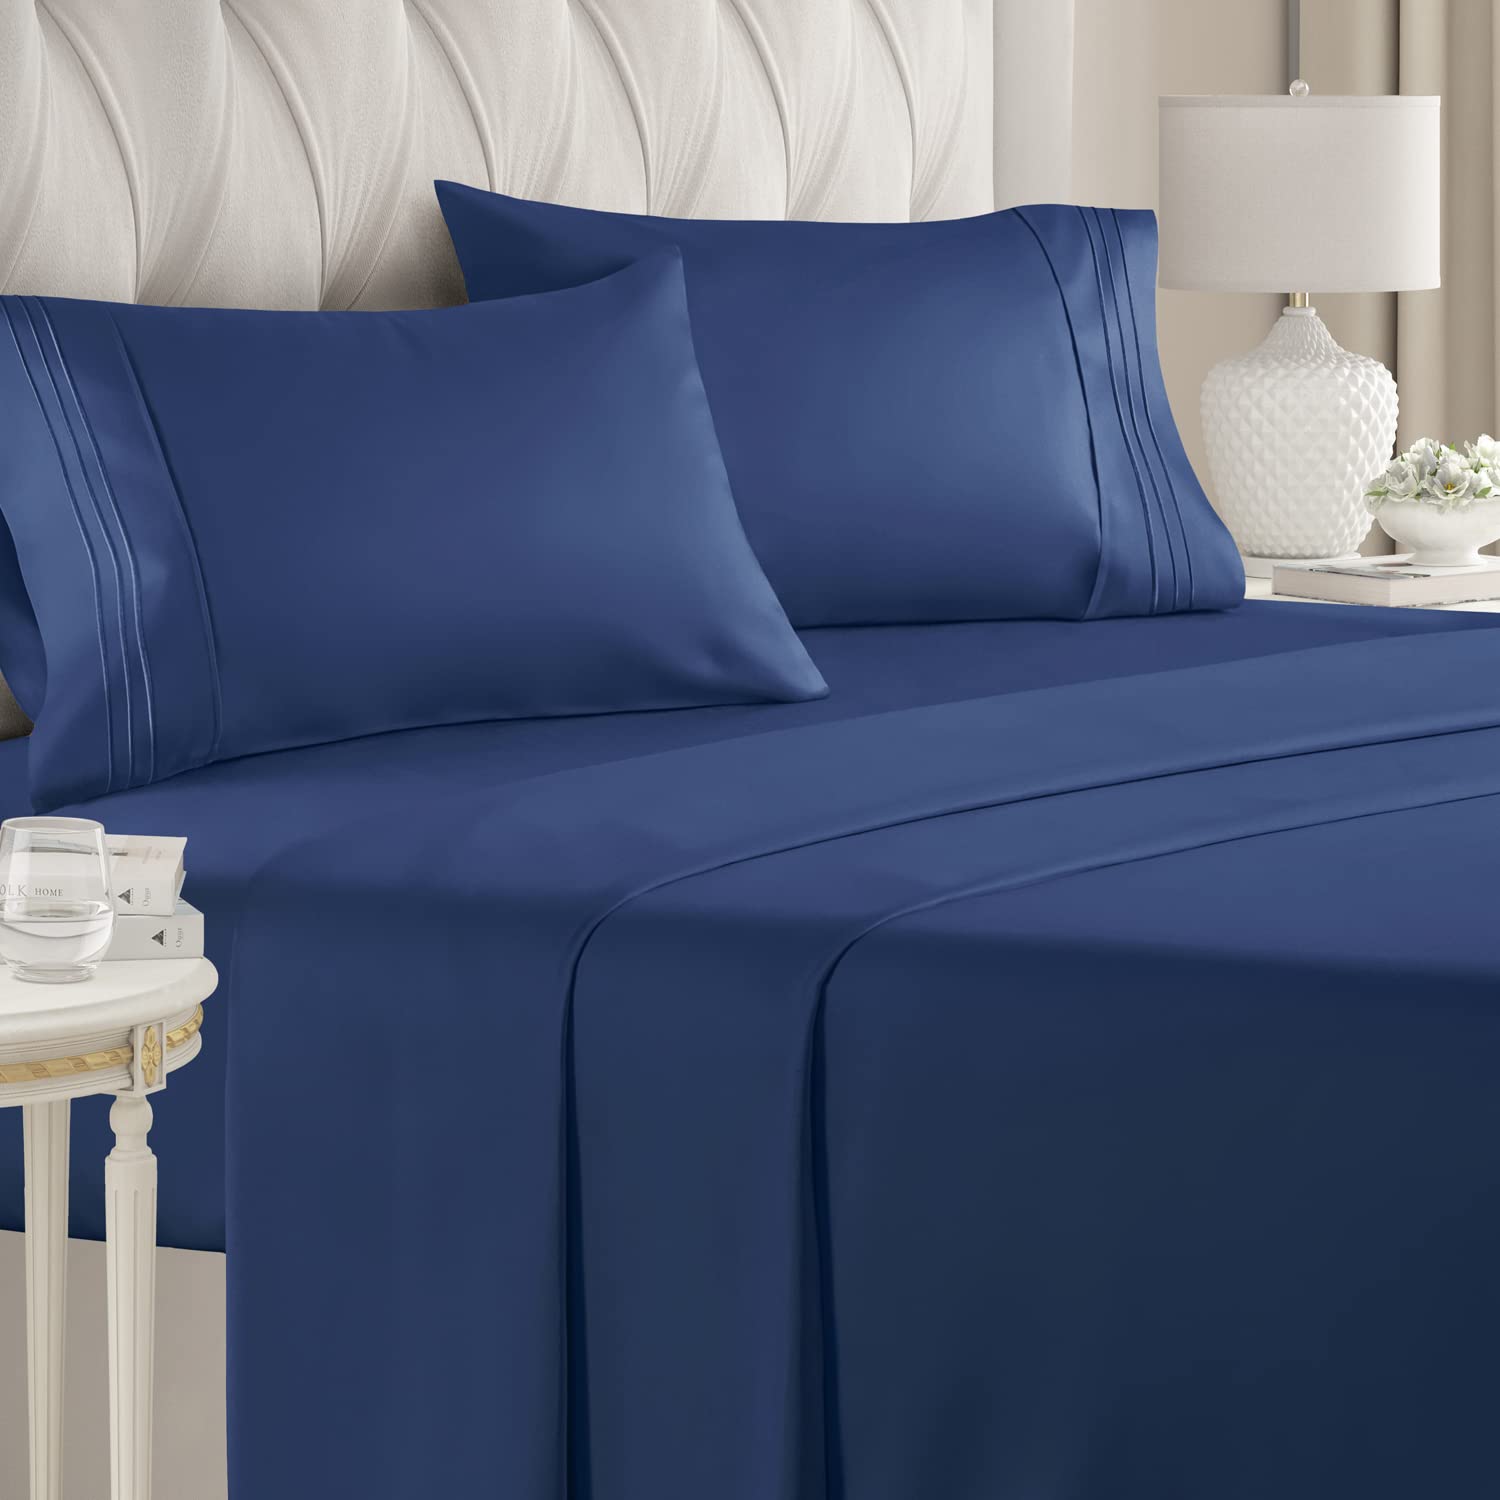 Book Cover Full Size Sheet Set - 4 Piece - Hotel Luxury Bed Sheets - Extra Soft - Deep Pockets - Easy Fit - Breathable & Cooling Sheets - Wrinkle Free - Comfy – Navy Blue Bed Sheets